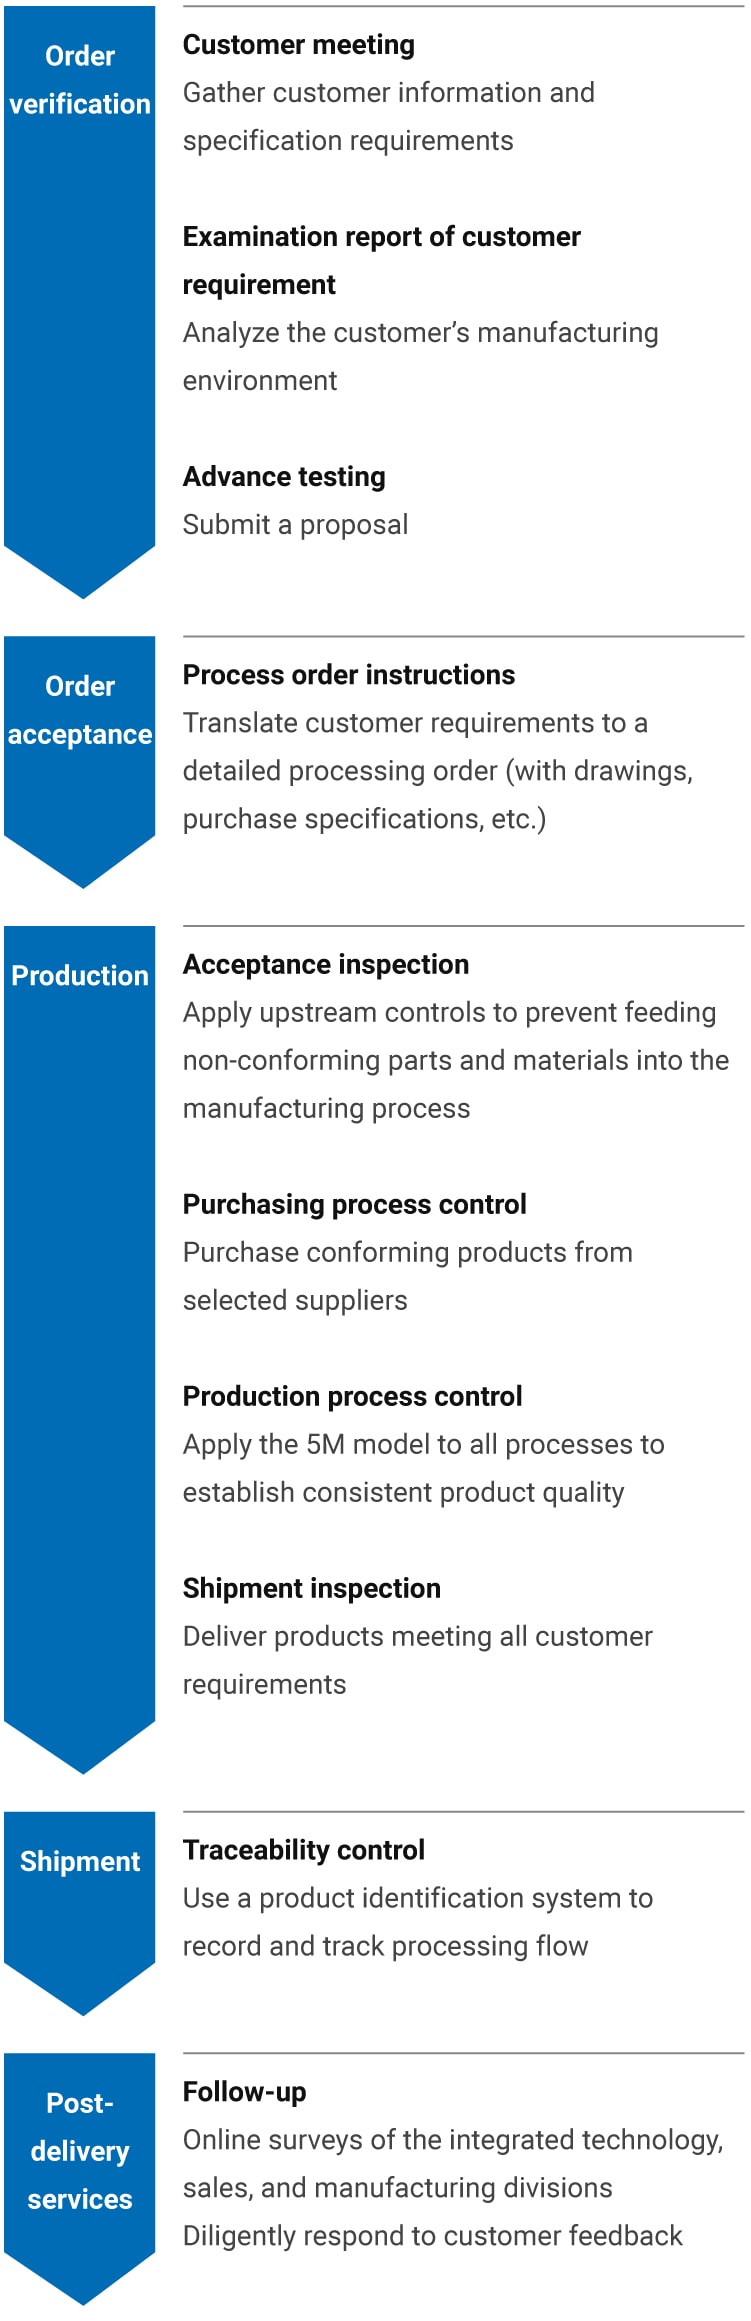 Order verification→Order acceptance→Production→Shipment→Post-delivery services